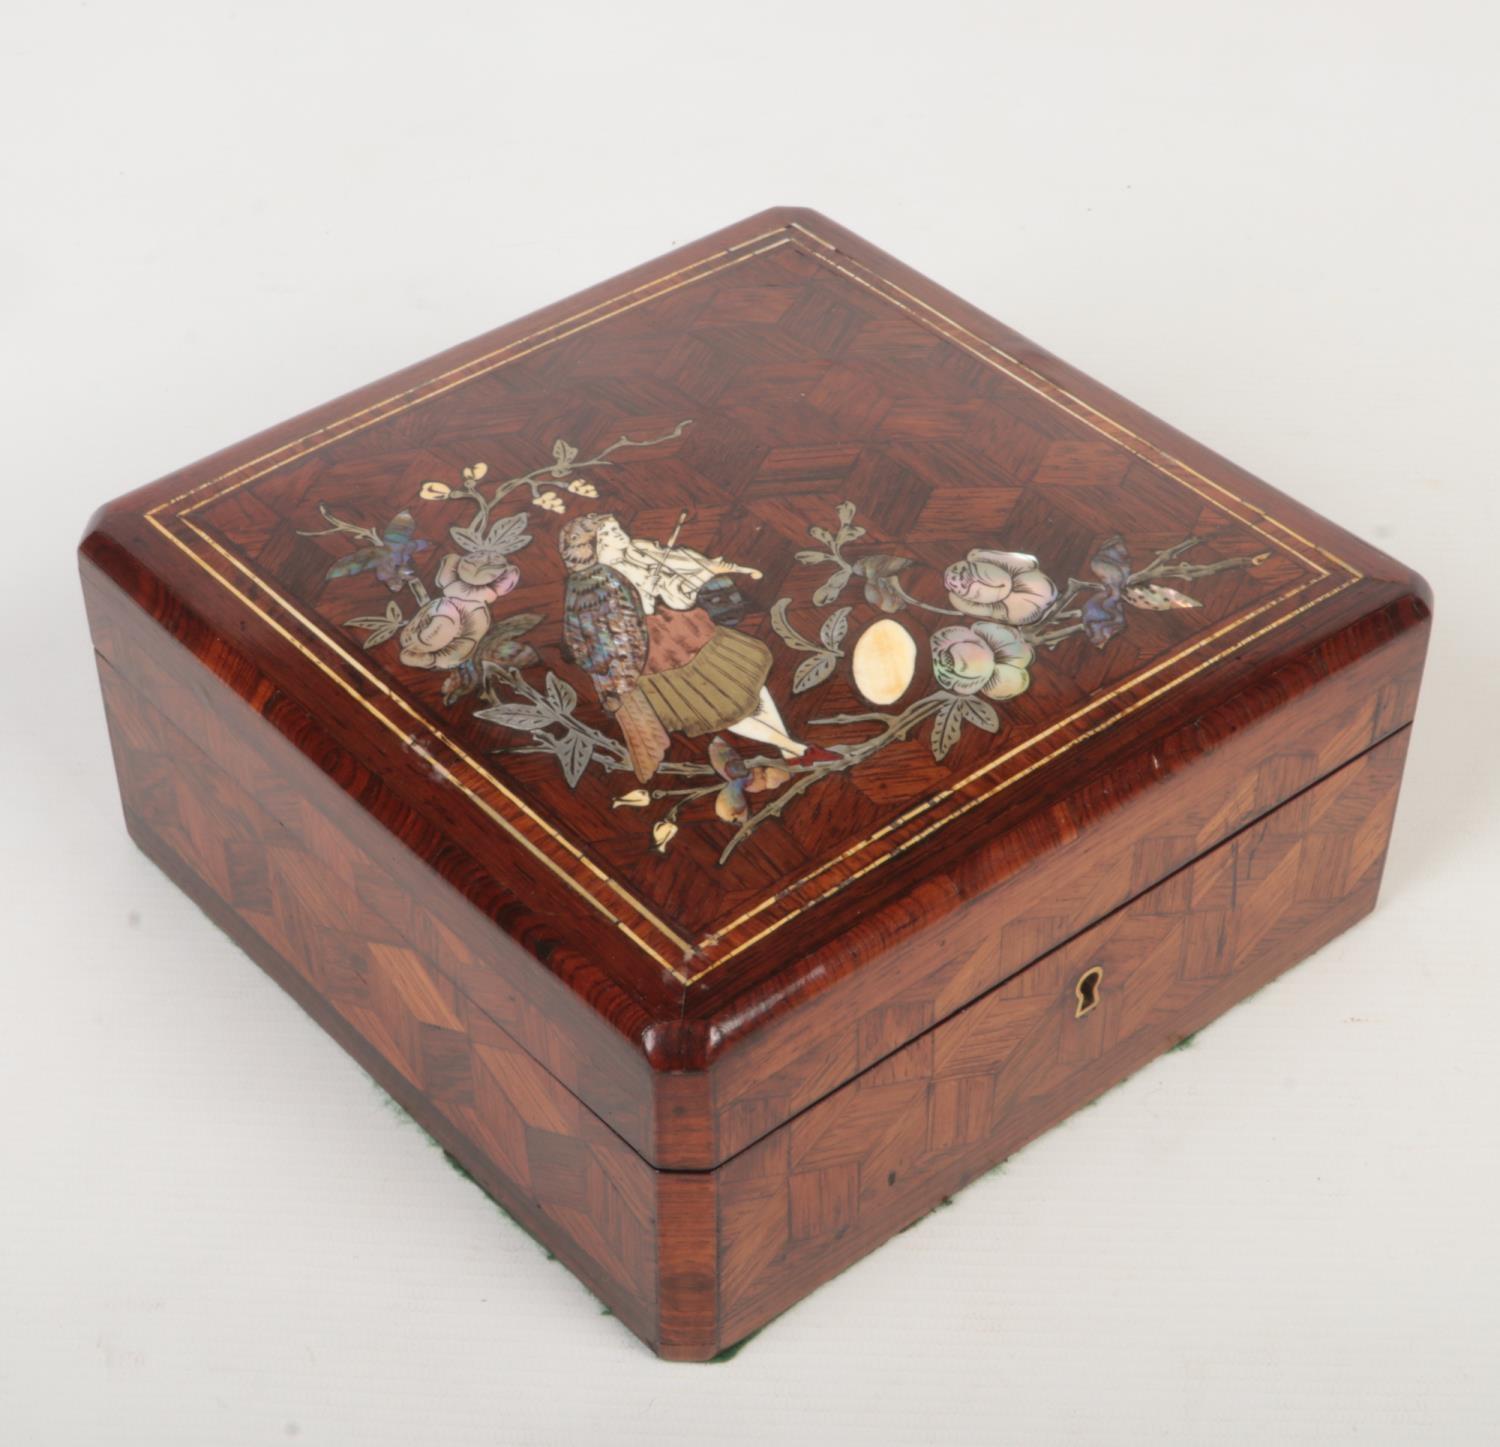 A 19th century French kingwood parquetry jewellery casket with cushioned silk interior. Inlaid to